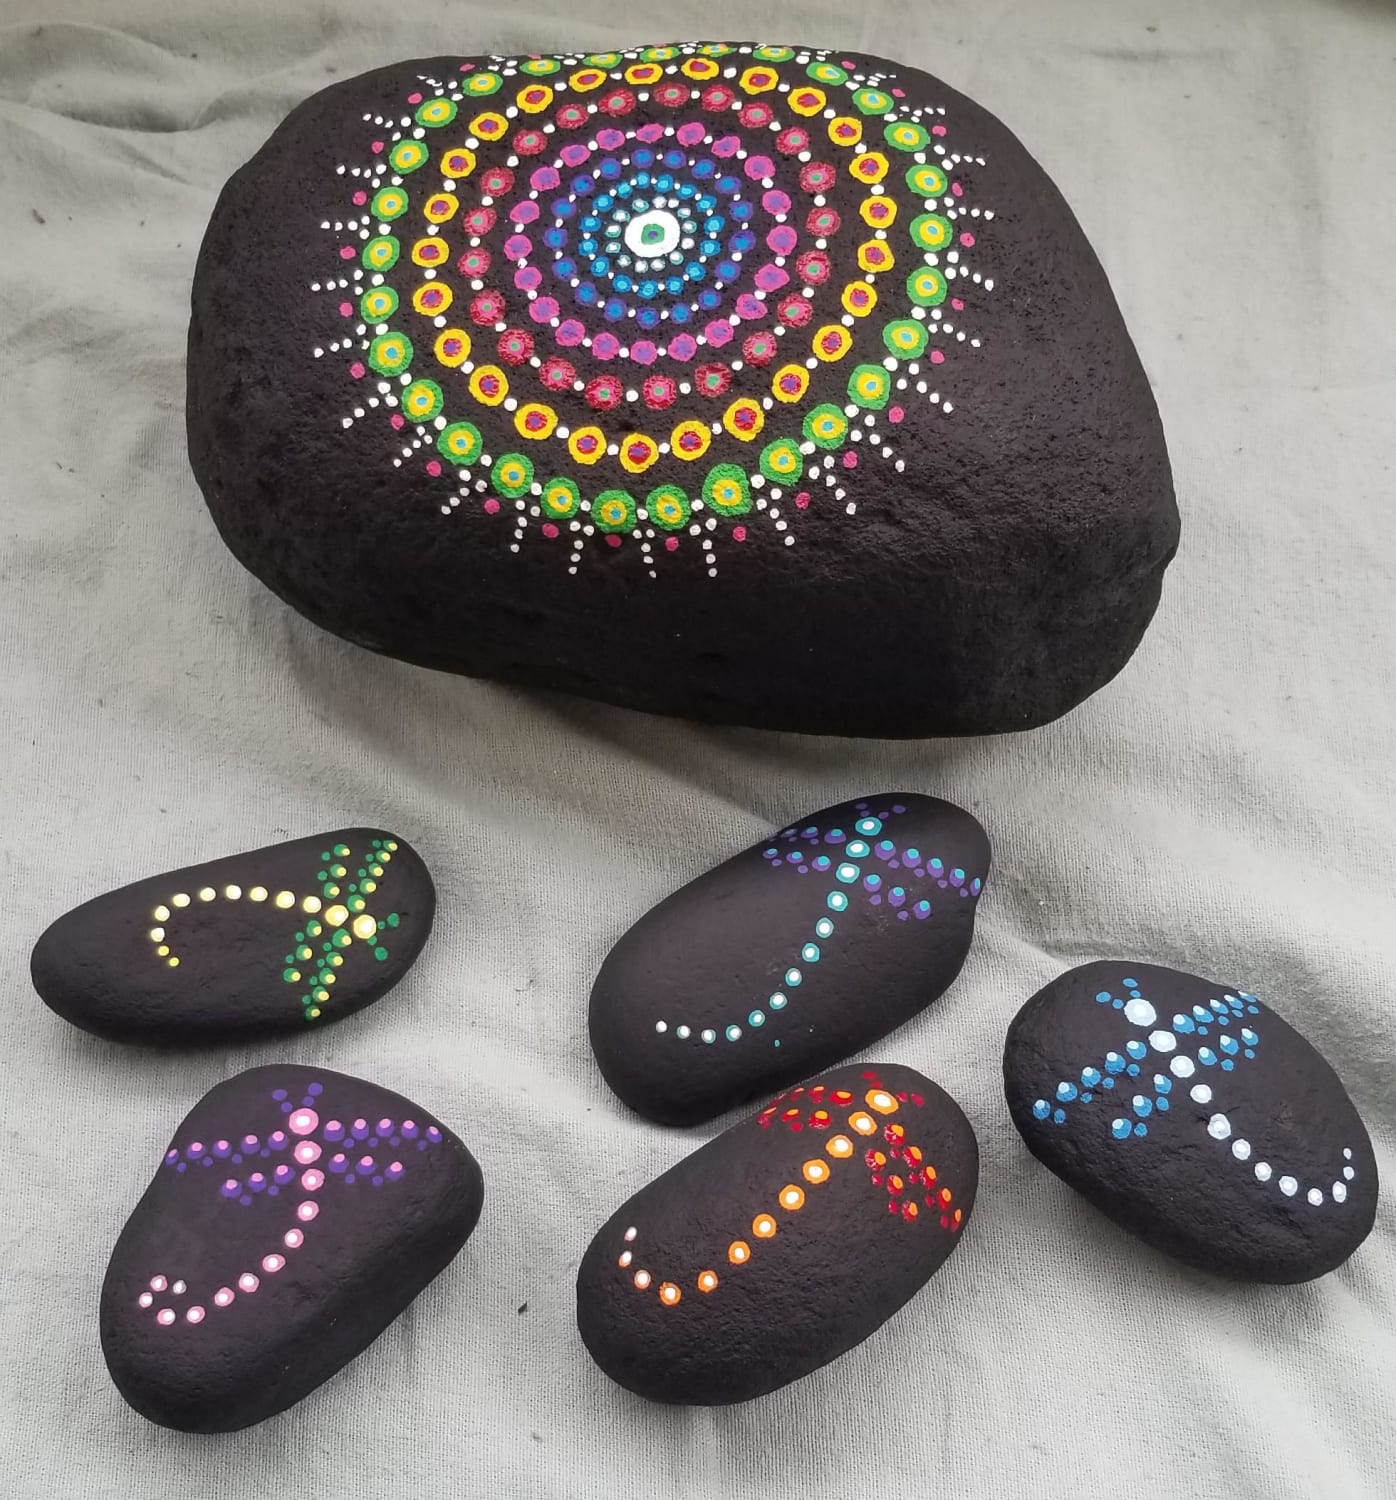 These Mandala stones I made for my patio garden this afternoon